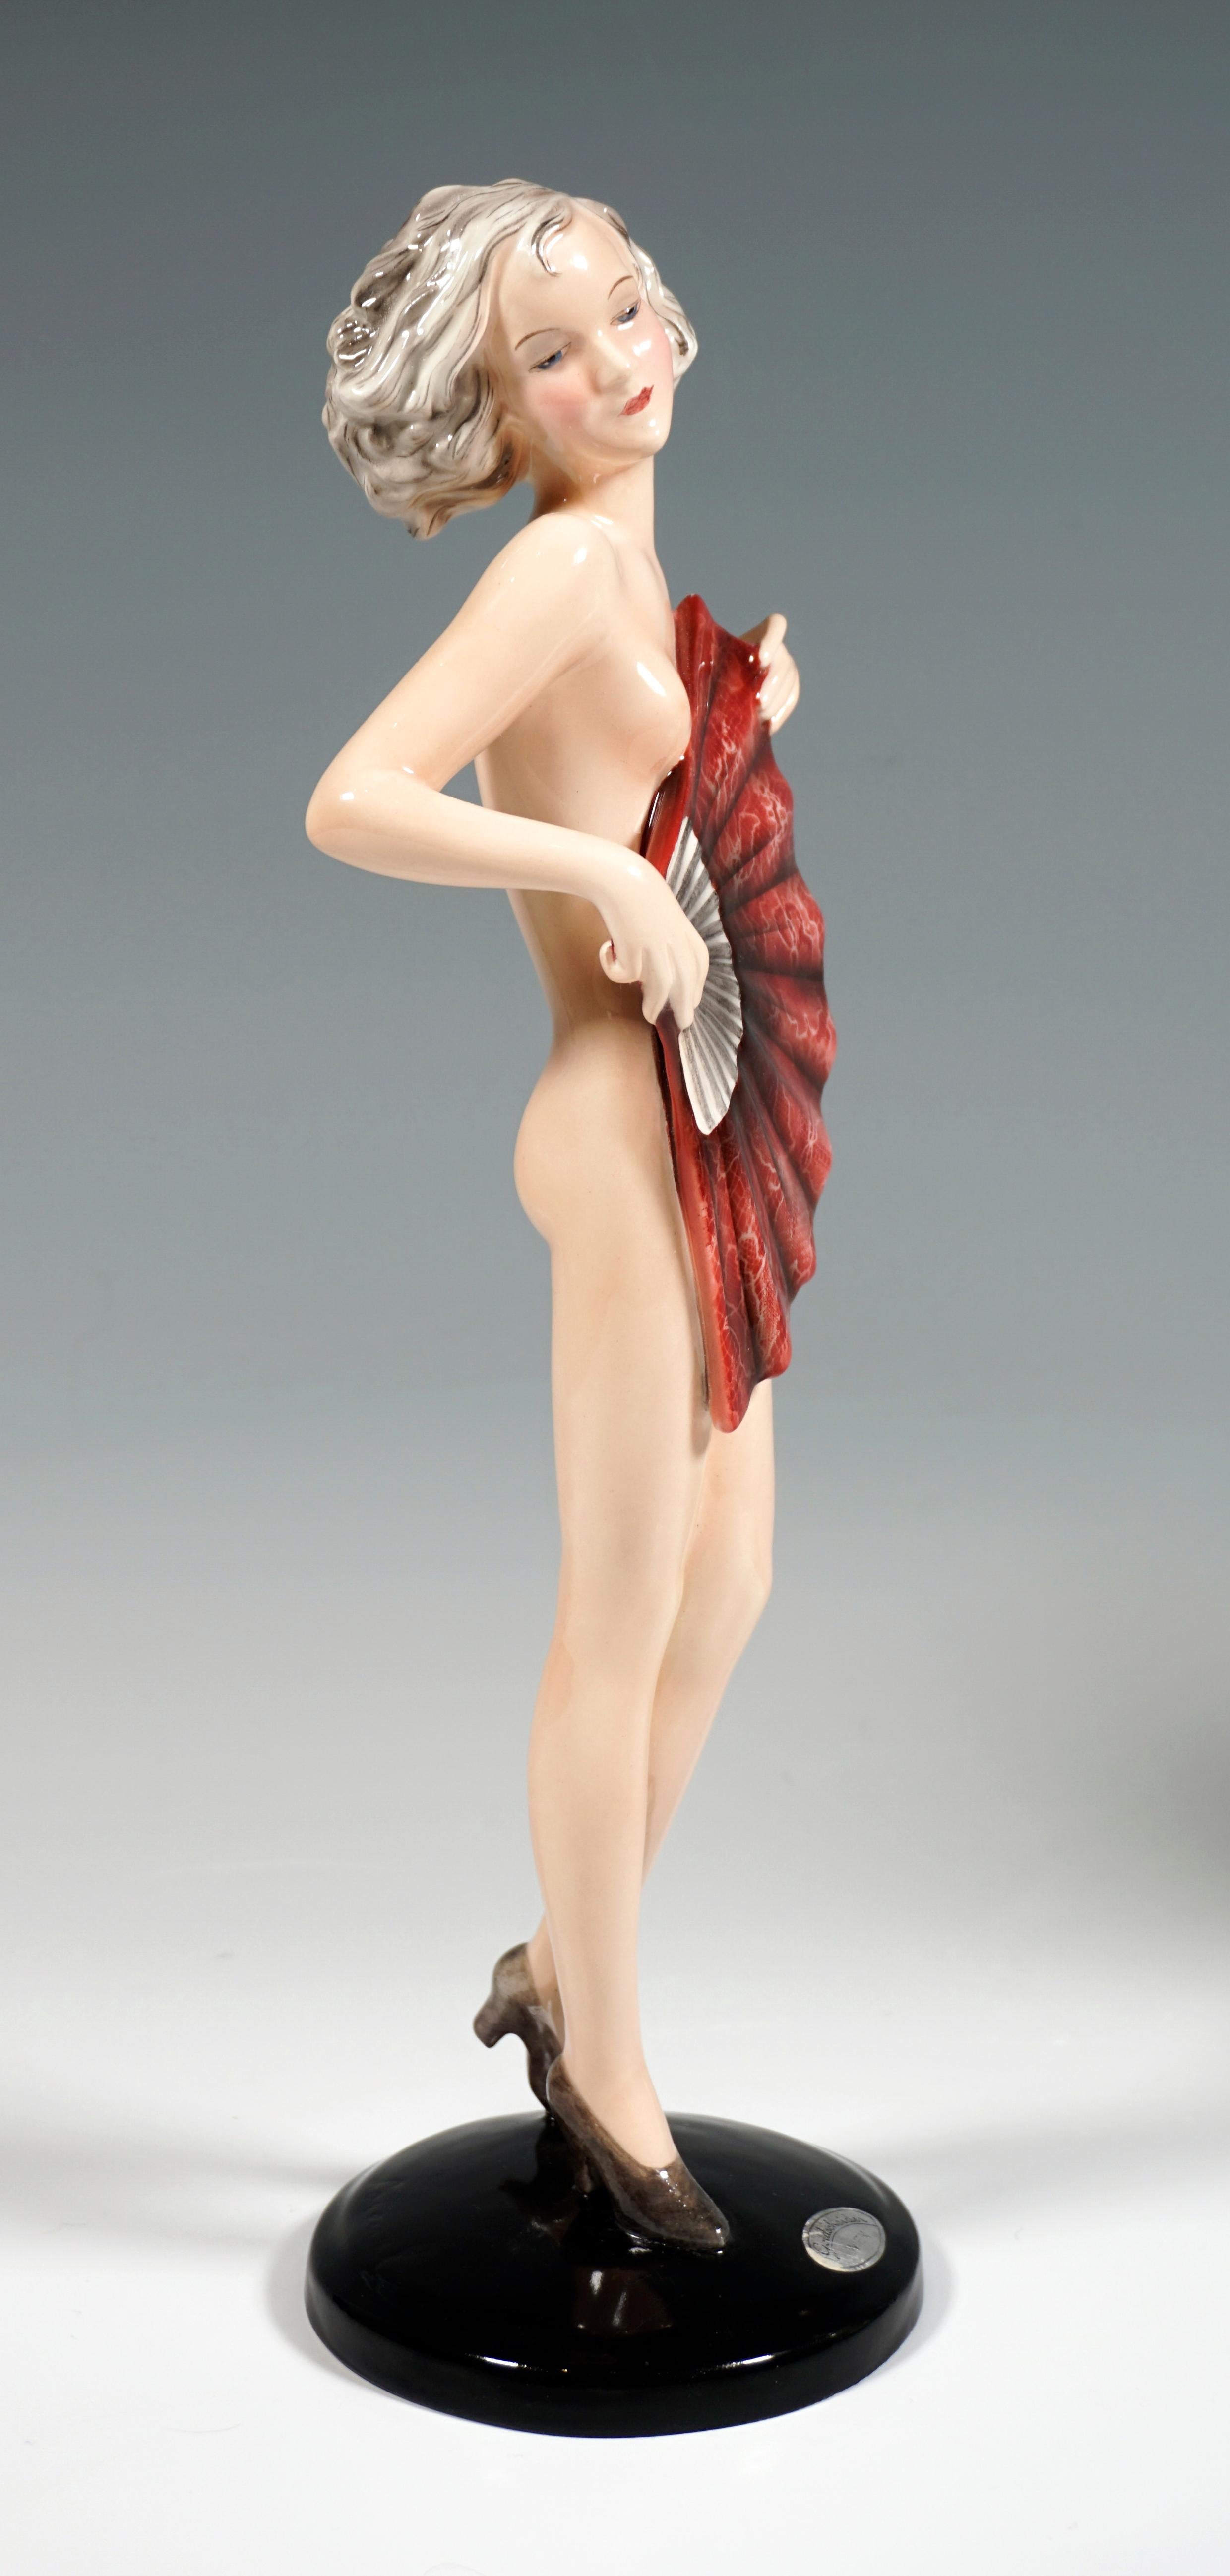 Very rare Goldscheider ceramic figurine of the 1930s:
The standing young pretty lady with curly, chin-length hair only wears high heels and covers her nakedness with a large, red fan which she holds in front of her with both hands.
On a black,